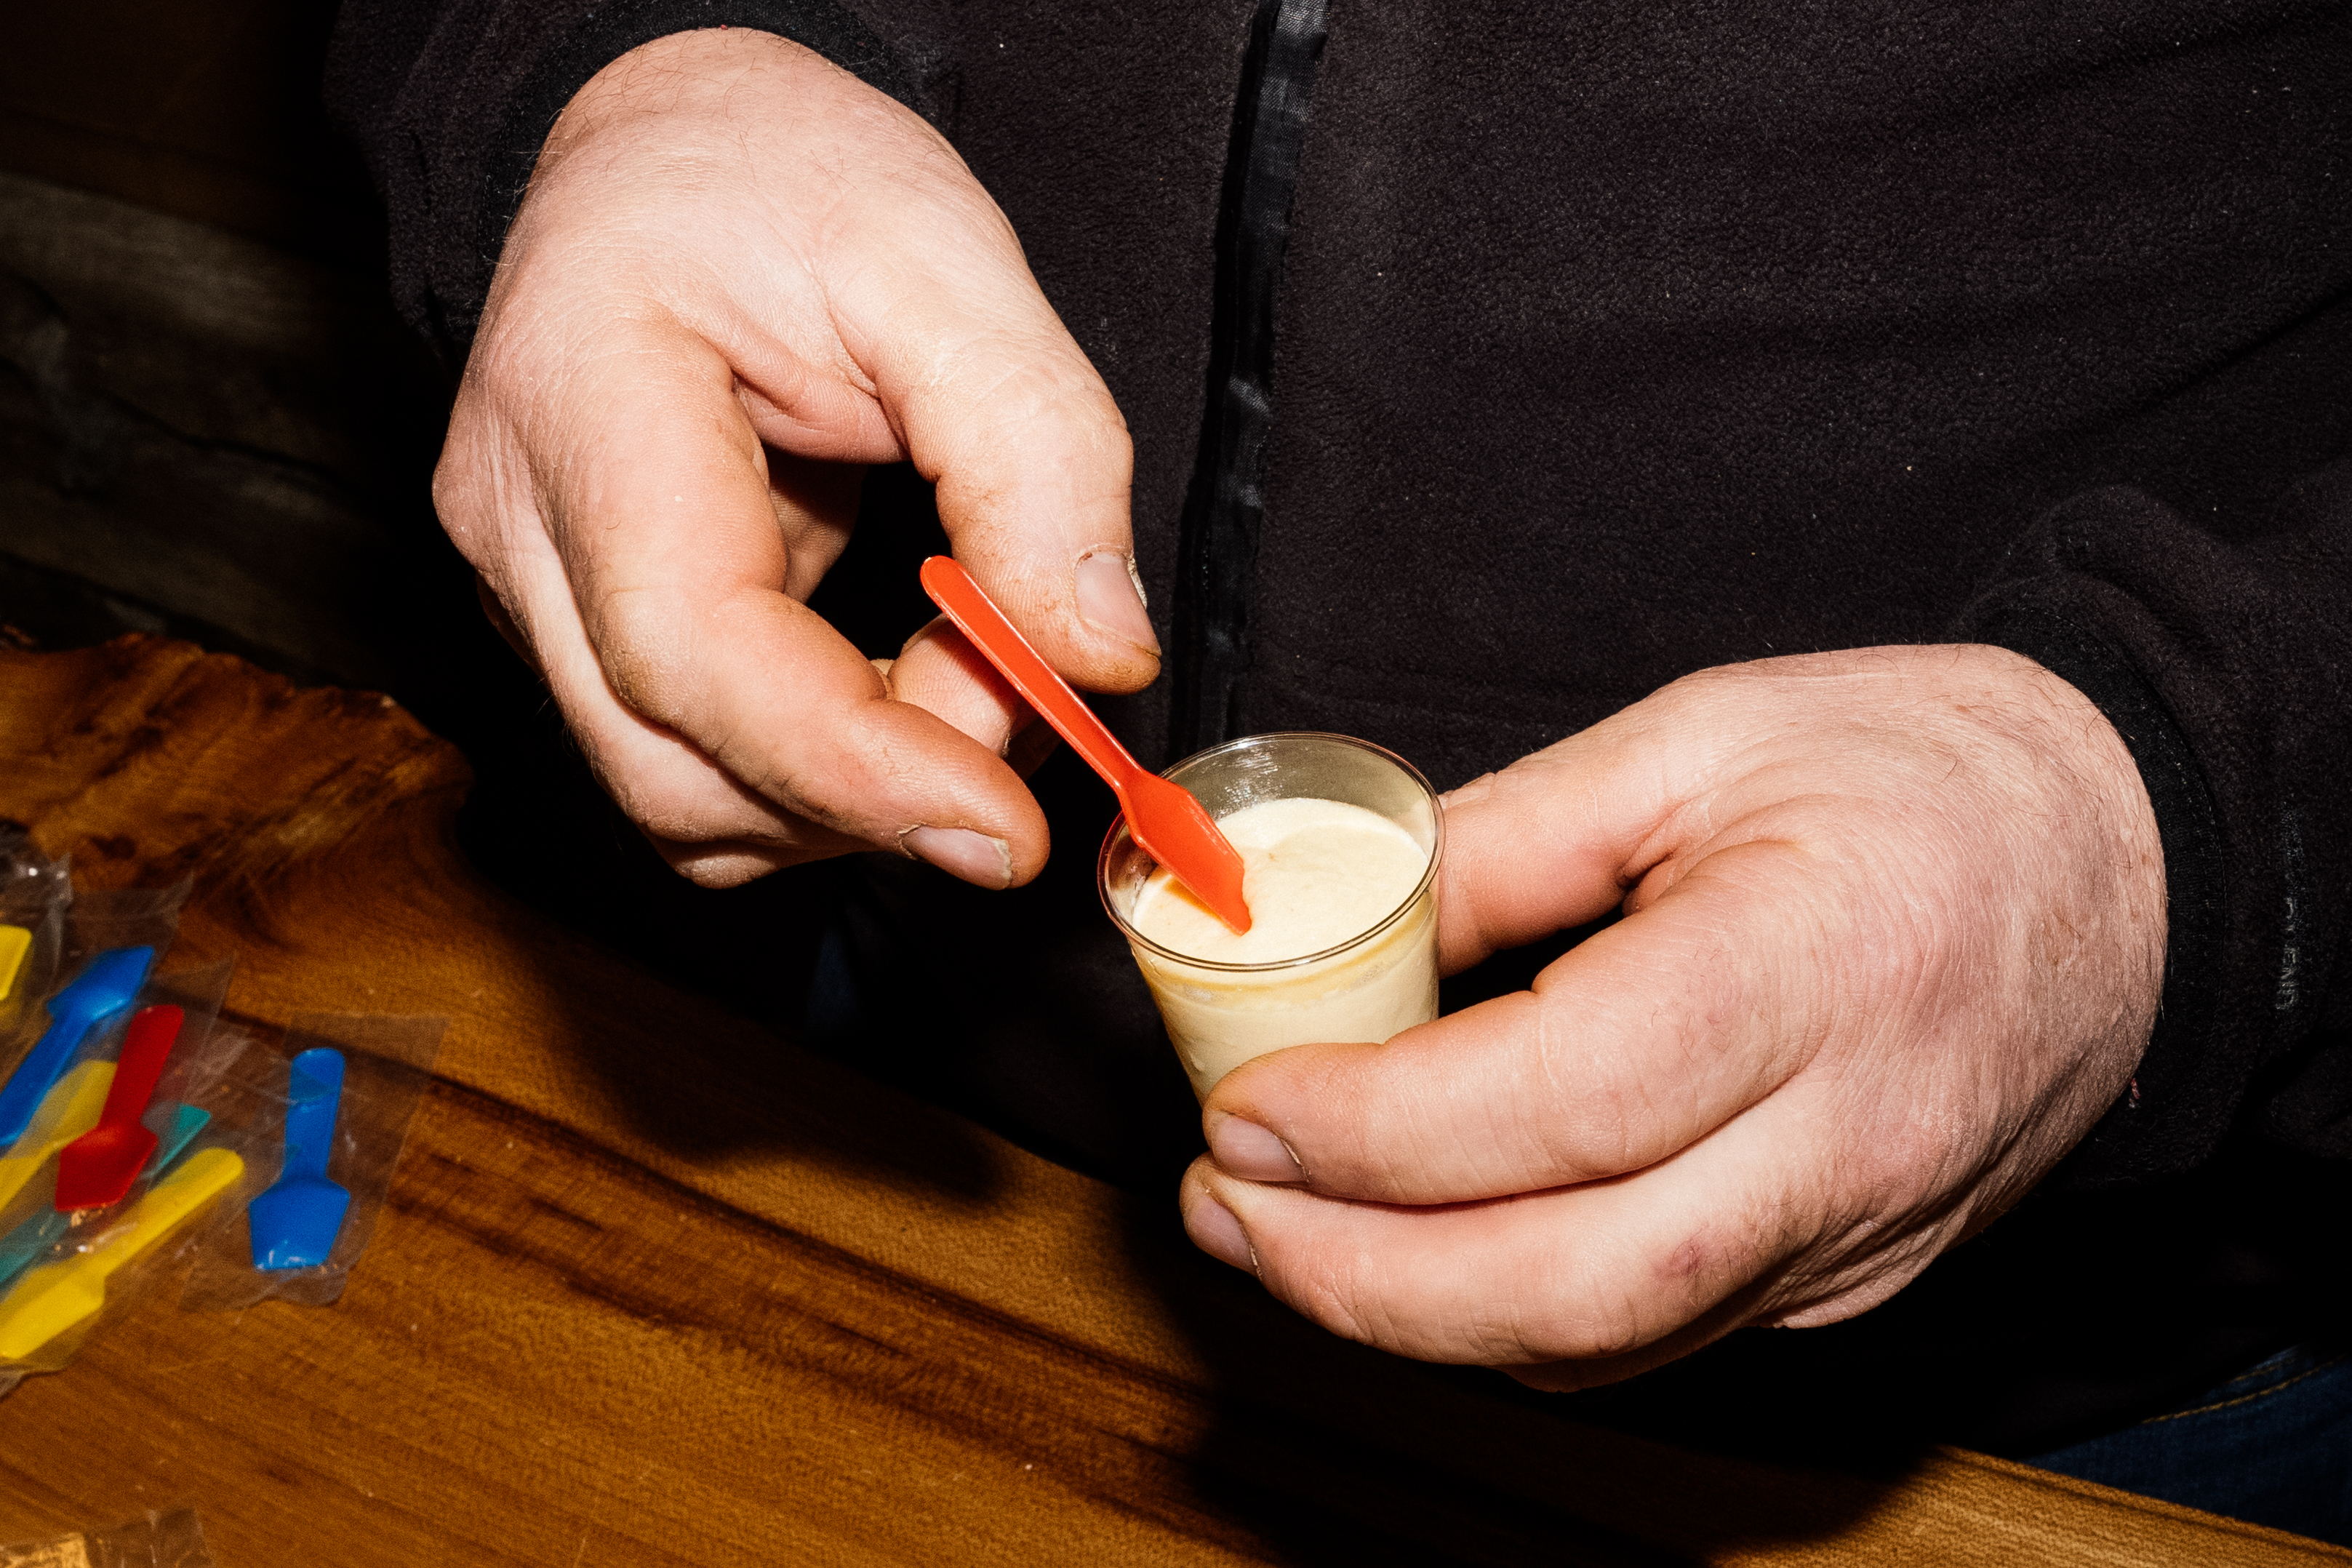 Patrice Riauté, pork ice cream – Patrice holding a tiny glass and sticking an orange plastic spoon in it.